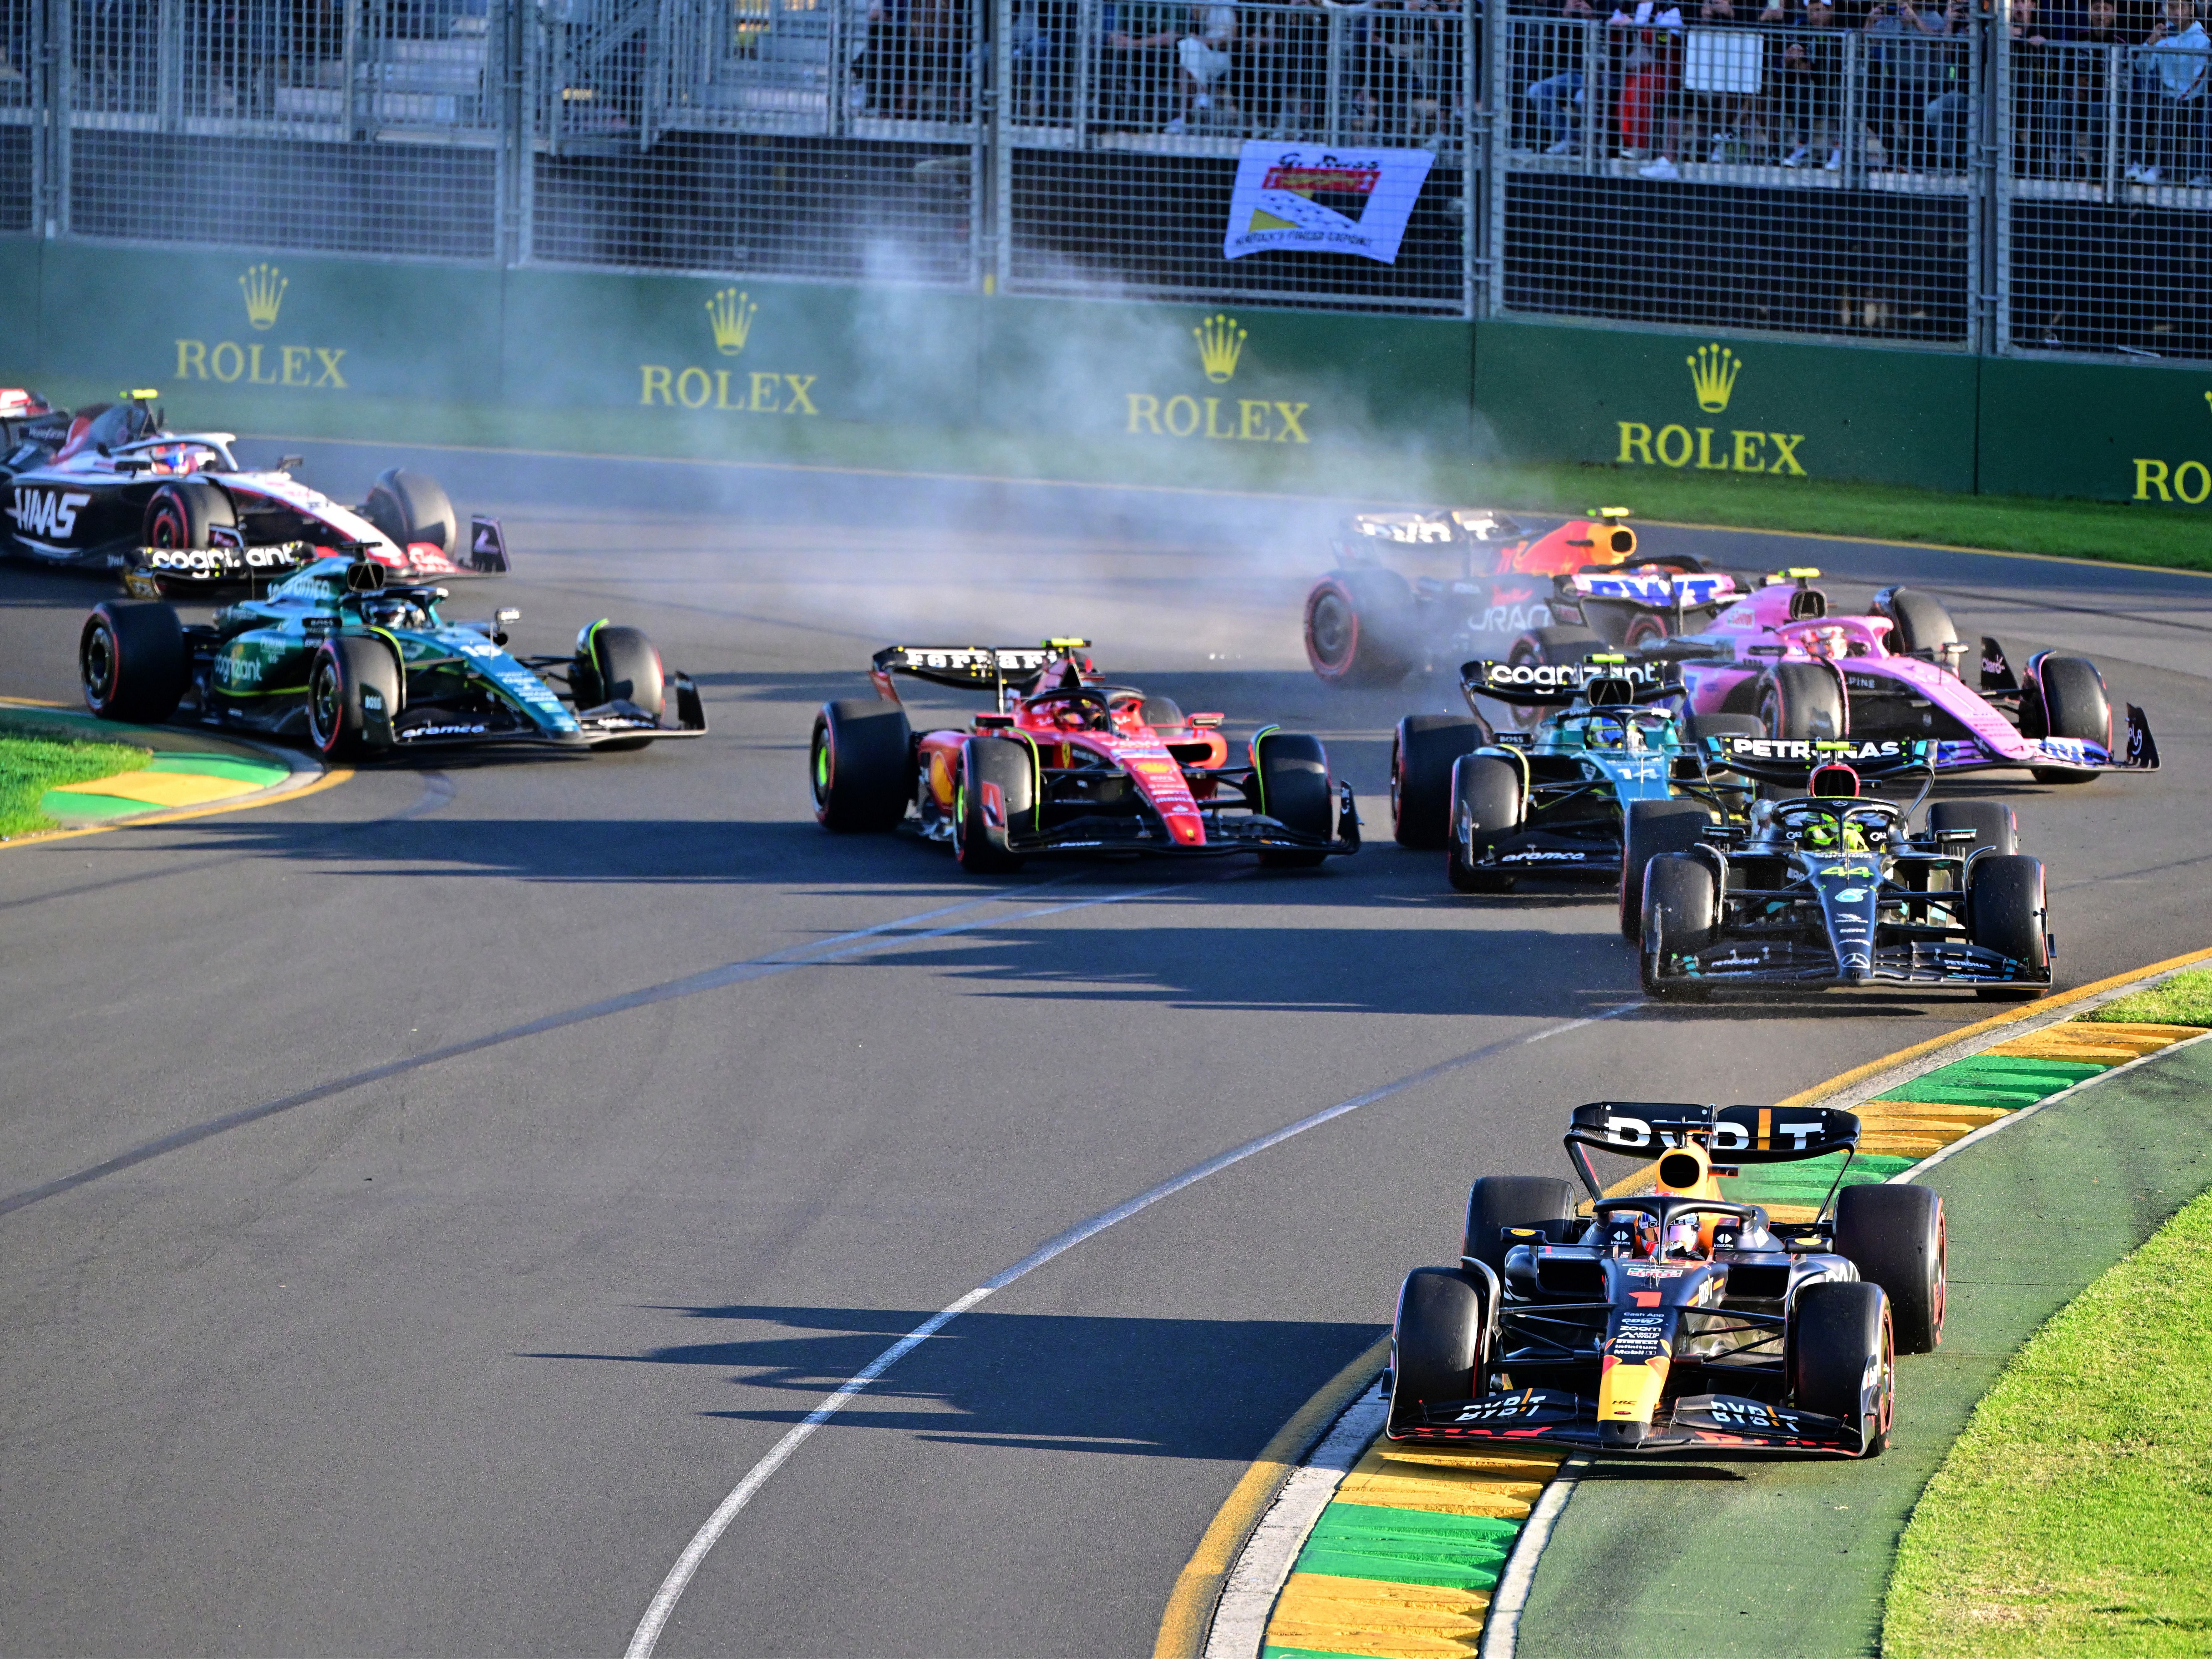 Max Verstappen (1) leads Lewis Hamilton (44) and the rest of the field at the second restart during the 2023 F1 Australian Grand Prix. (Photo by Peter van Egmond/Getty Images)